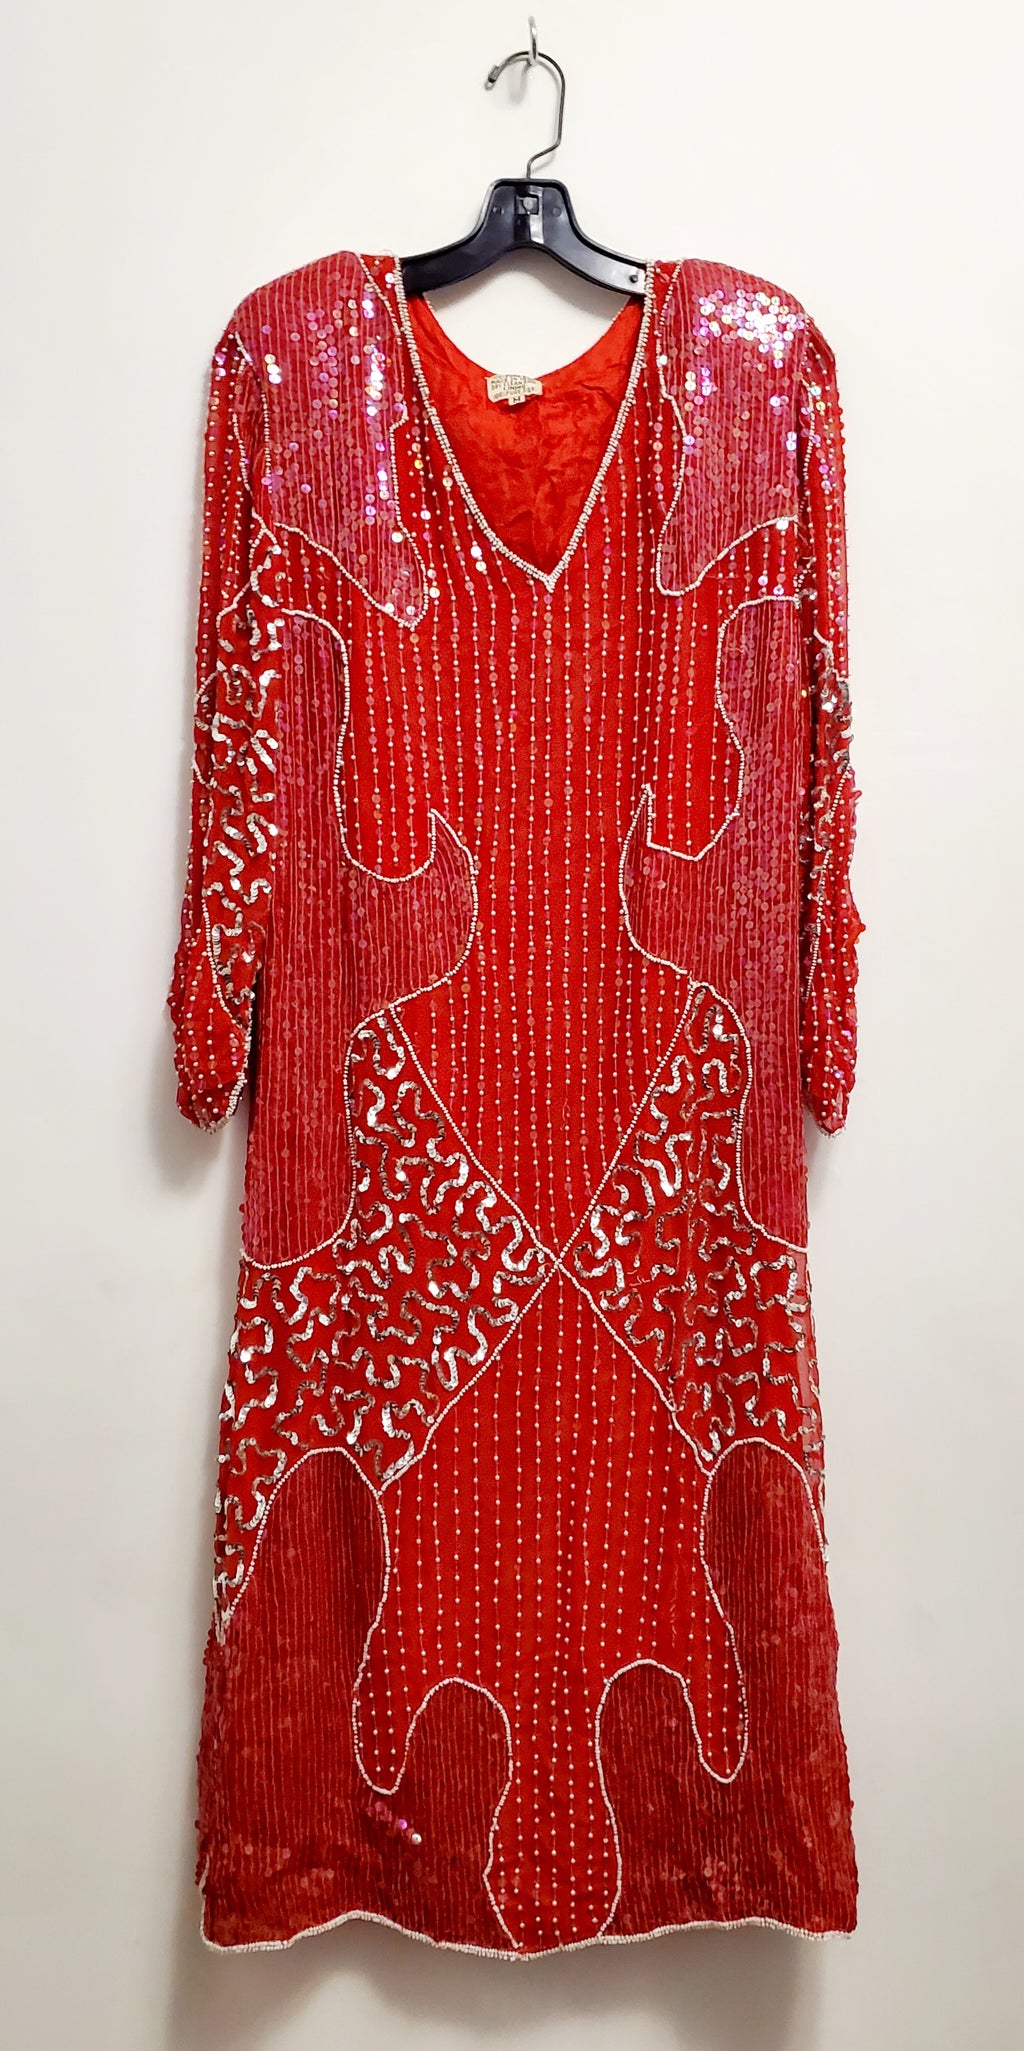 Front view of vintage red and silver sequin dress